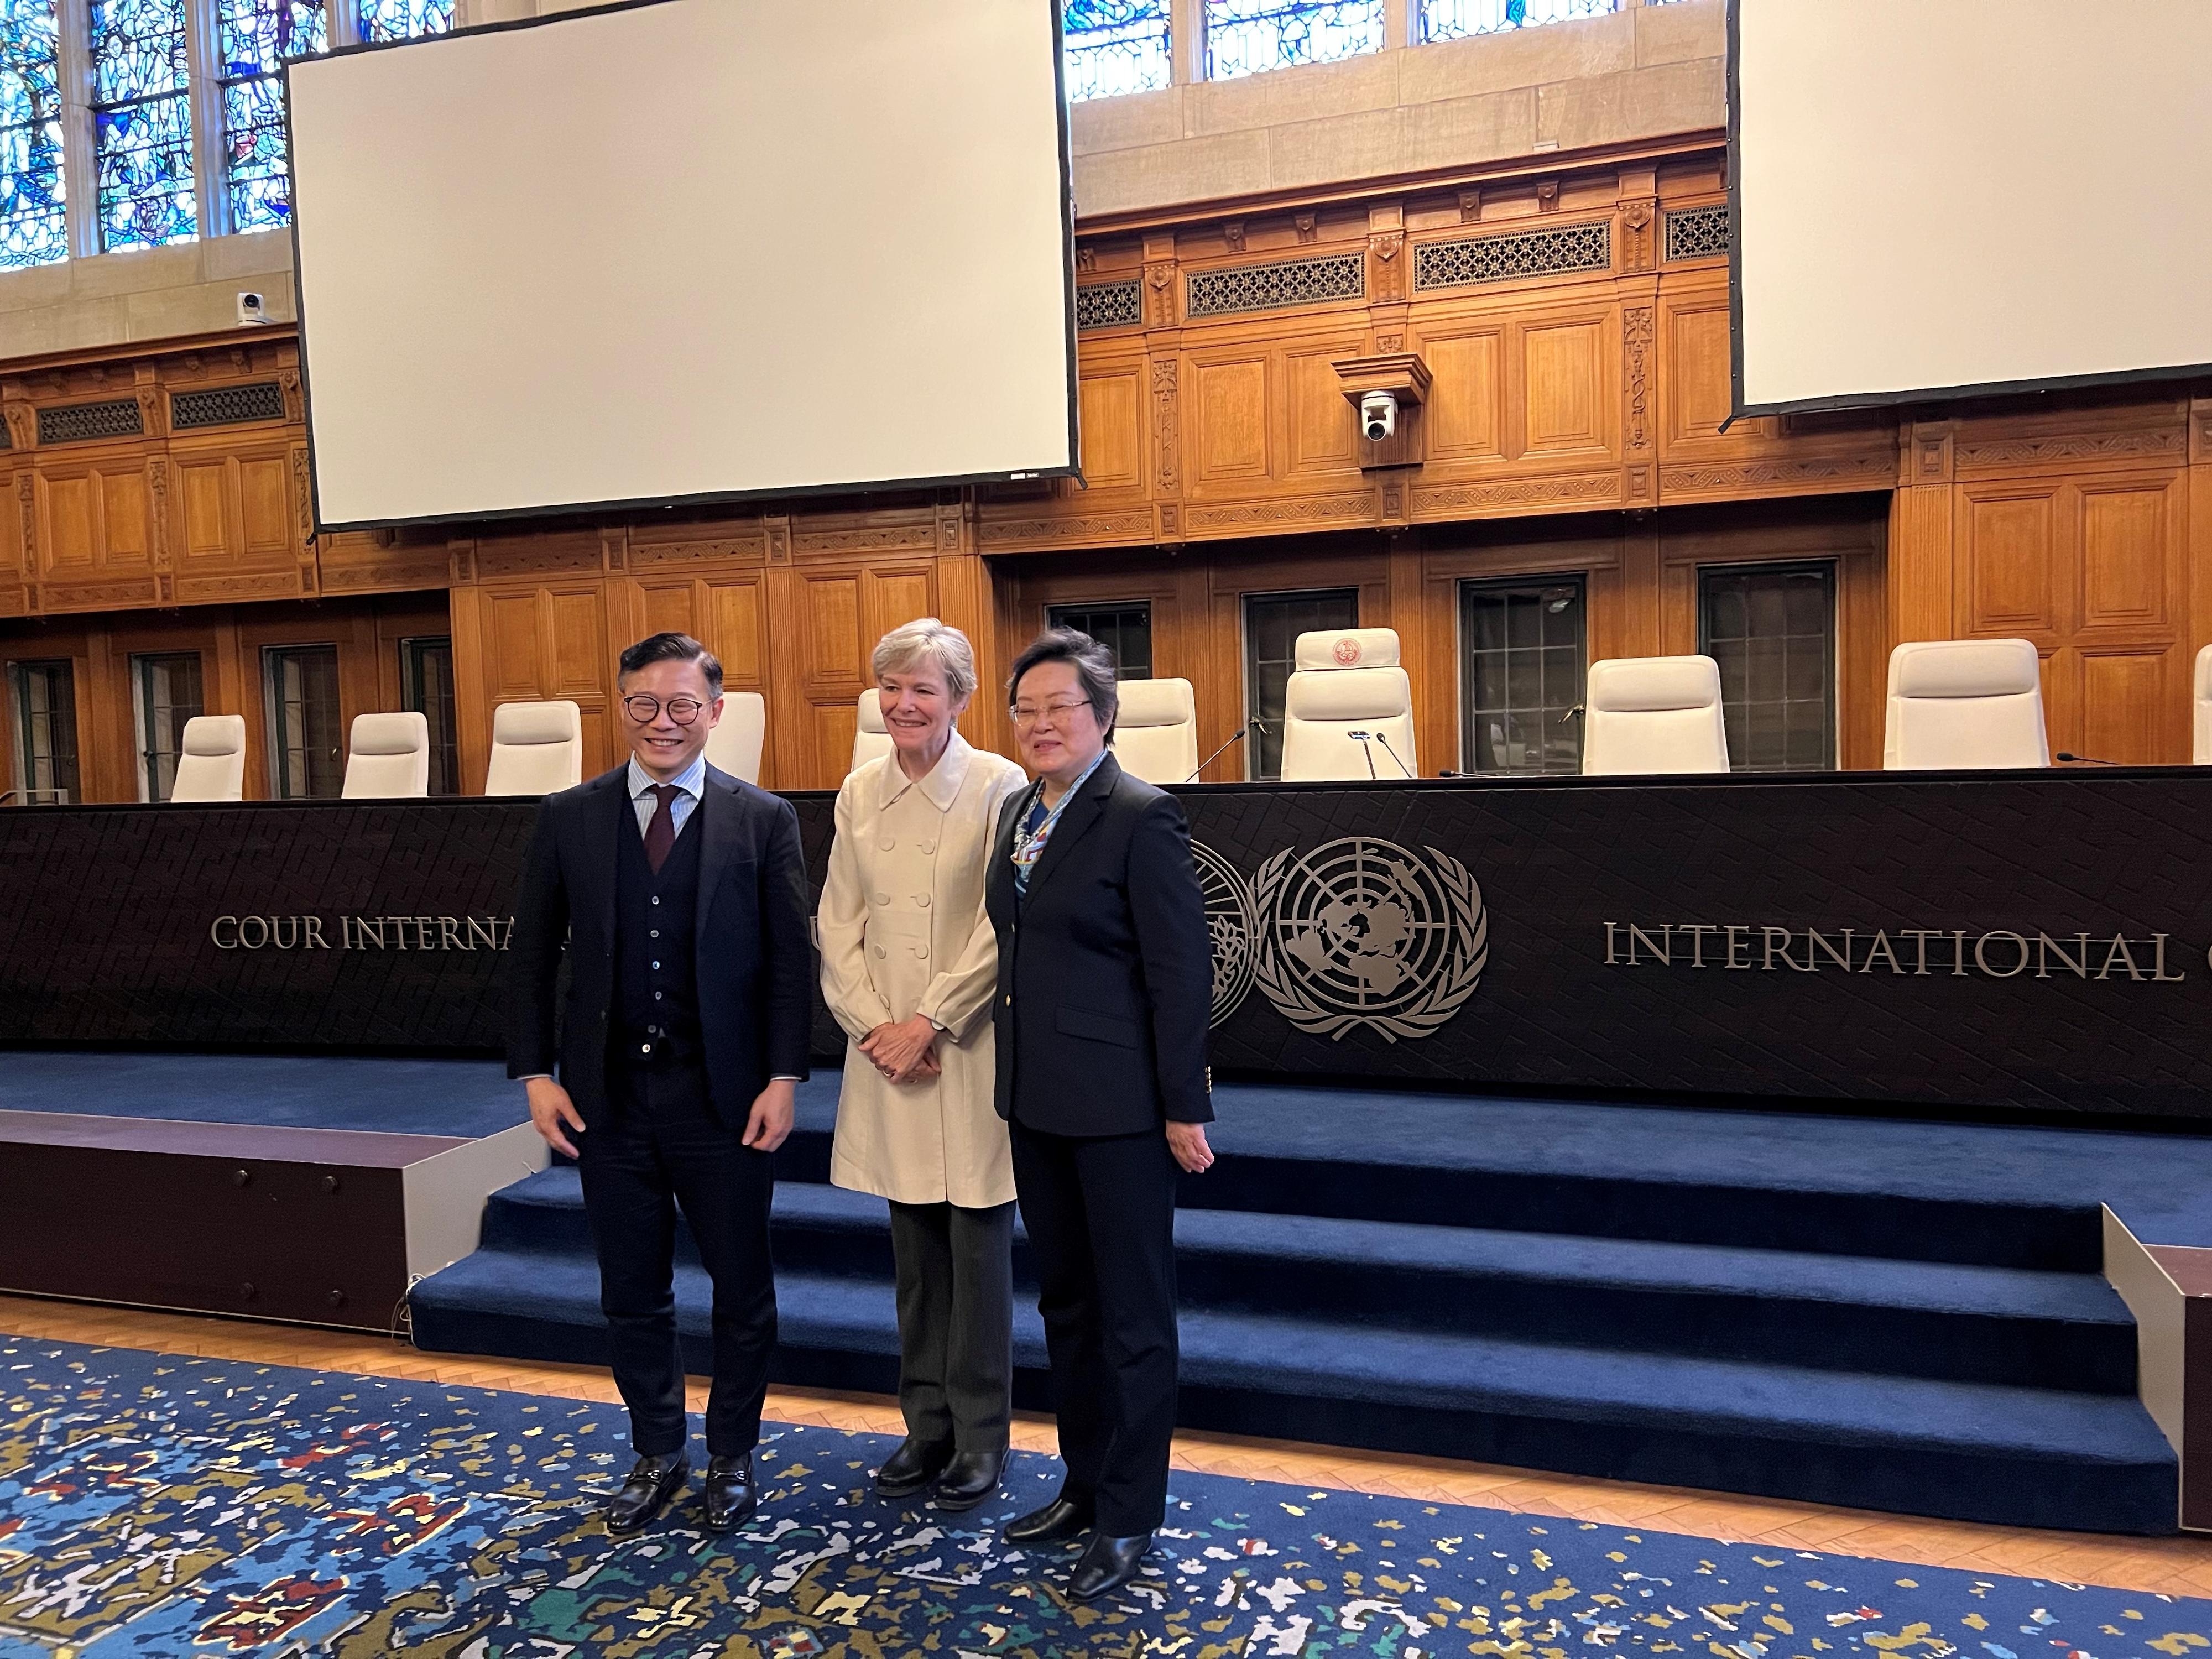 The Deputy Secretary for Justice, Mr Cheung Kwok-kwan (left) was pictured with Judge Xue Hanqin (right) and Judge Hilary Charlesworth (centre) of the United Nations International Court of Justice (ICJ) at the ICJ in The Hague, the Netherlands, on March 10 (The Hague time). 